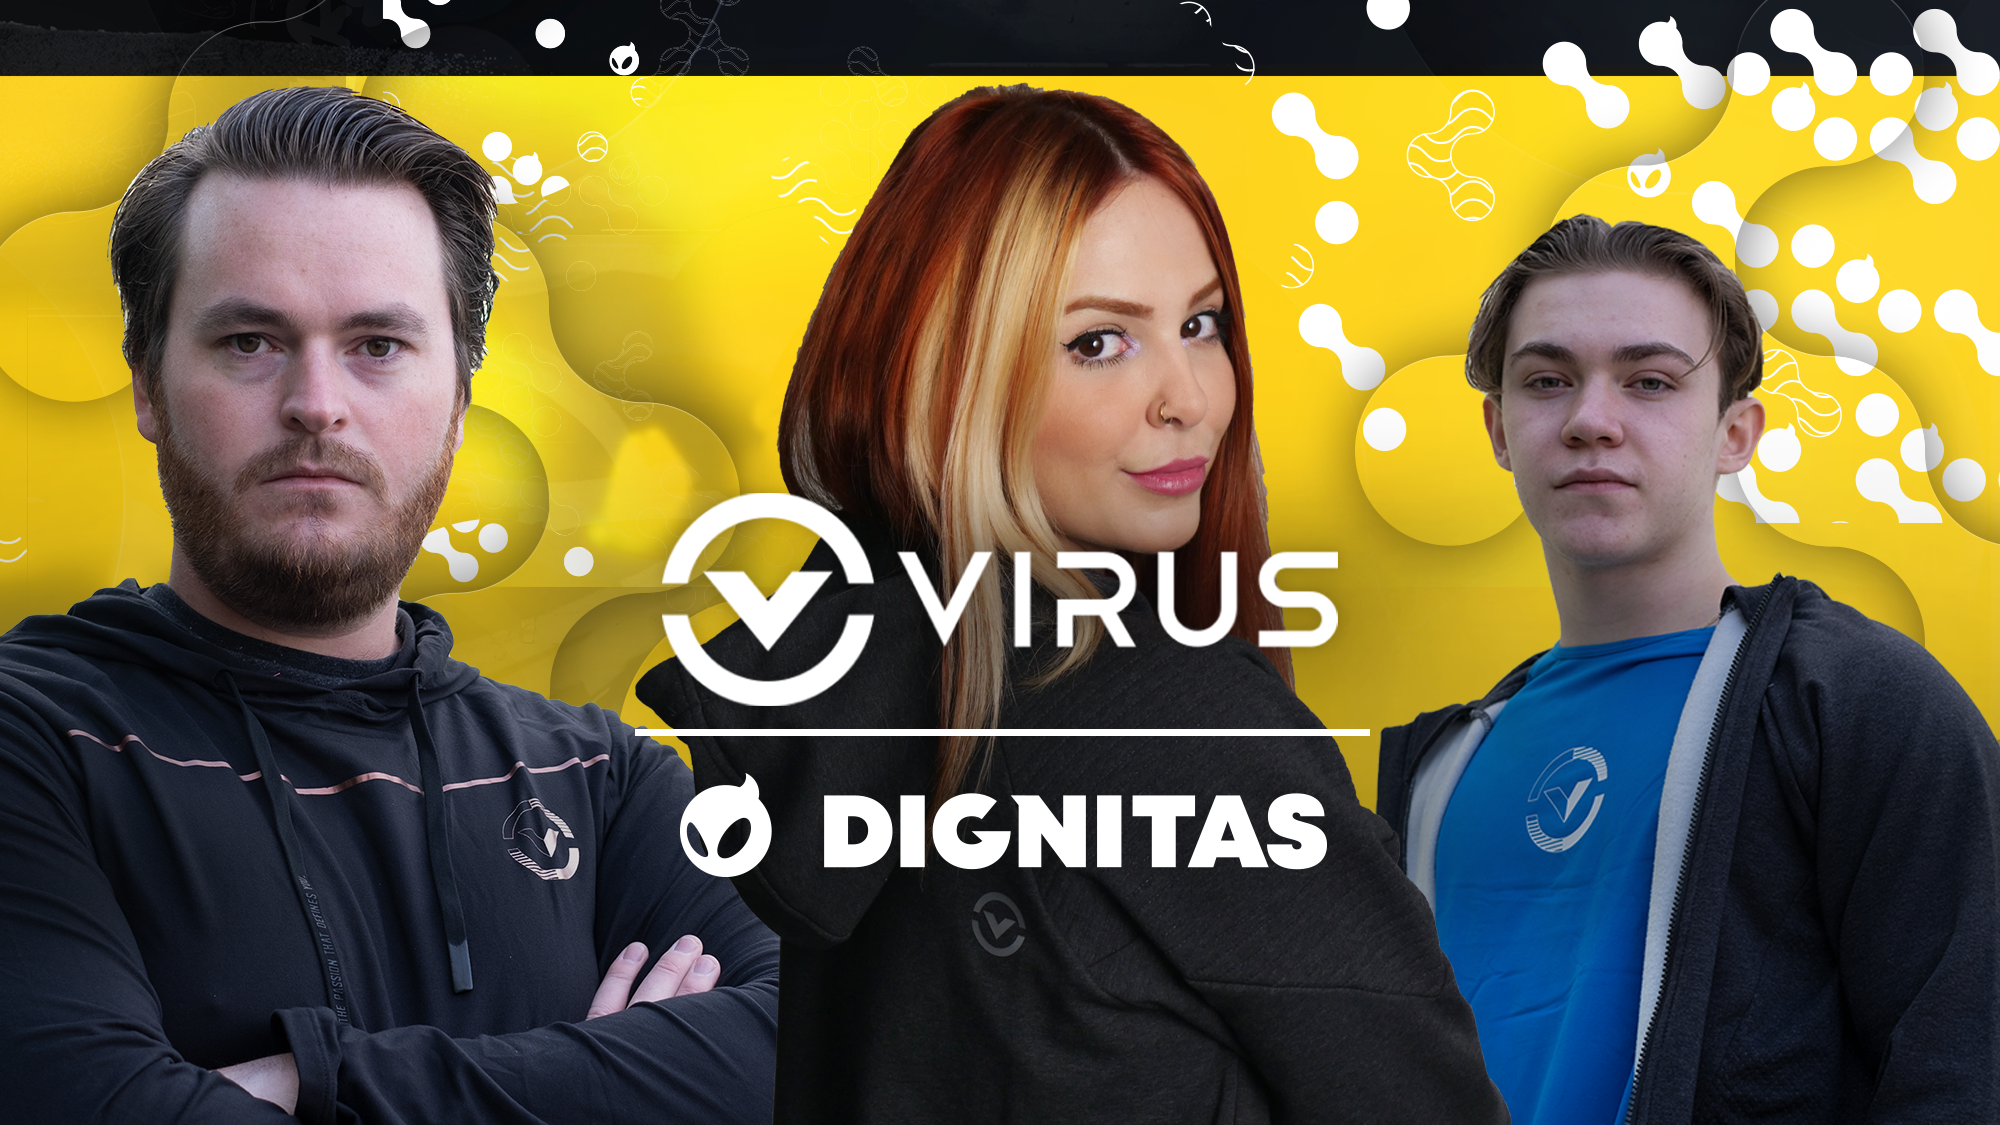 VIRUS International will create Dignitas’ Official Competitive Game Day uniform including the Official Team Jersey with logo presence on the front of the jersey, Game Day Warm Up and Performance Workout Apparel kits which include T-Shirt, Sweatshirt, Hoodie, Player Jacket, Joggers and Leggings.